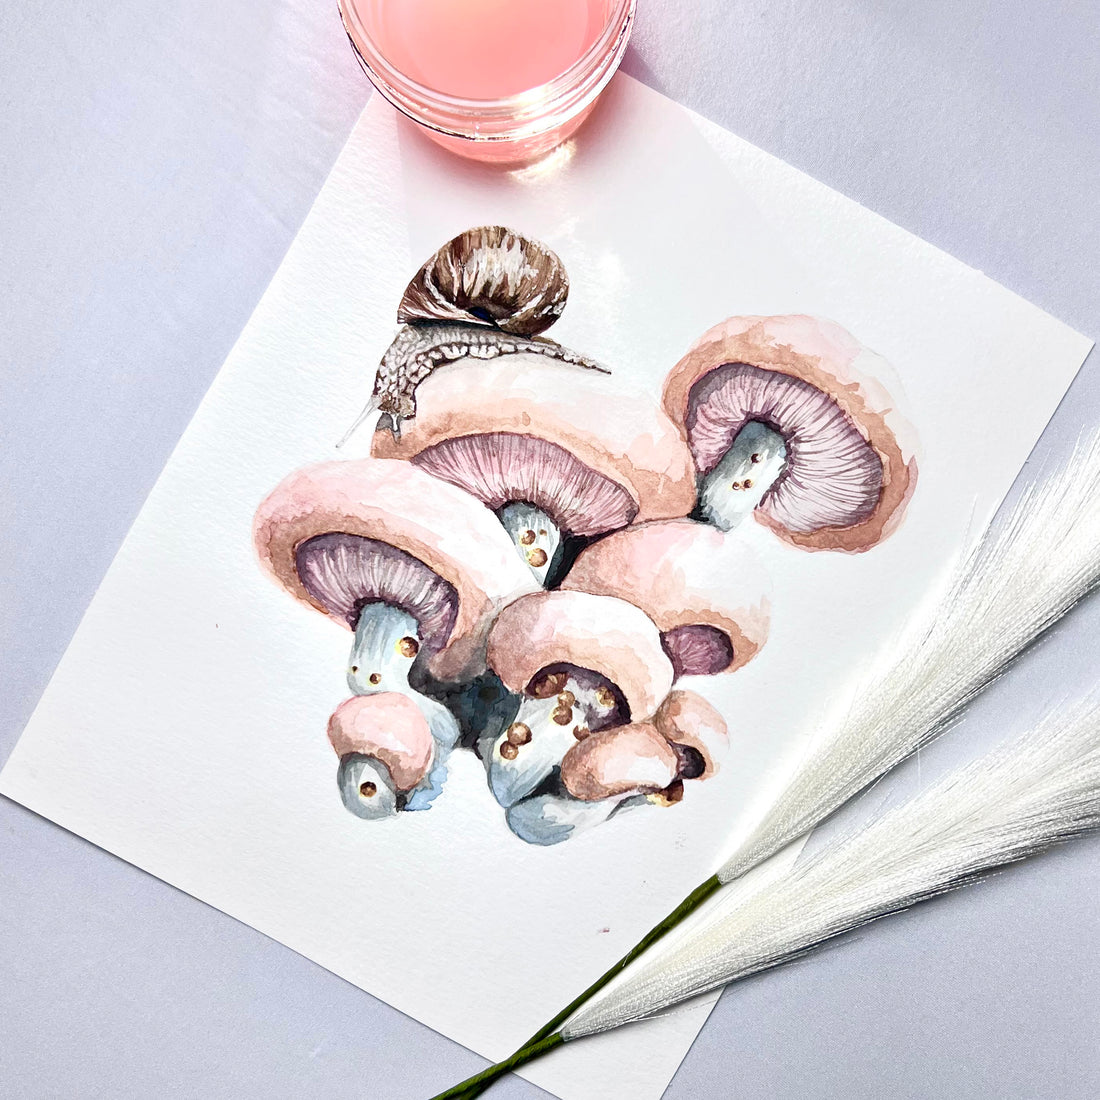 15 Mushroom Décor Ideas That Will Transform Your Living Space